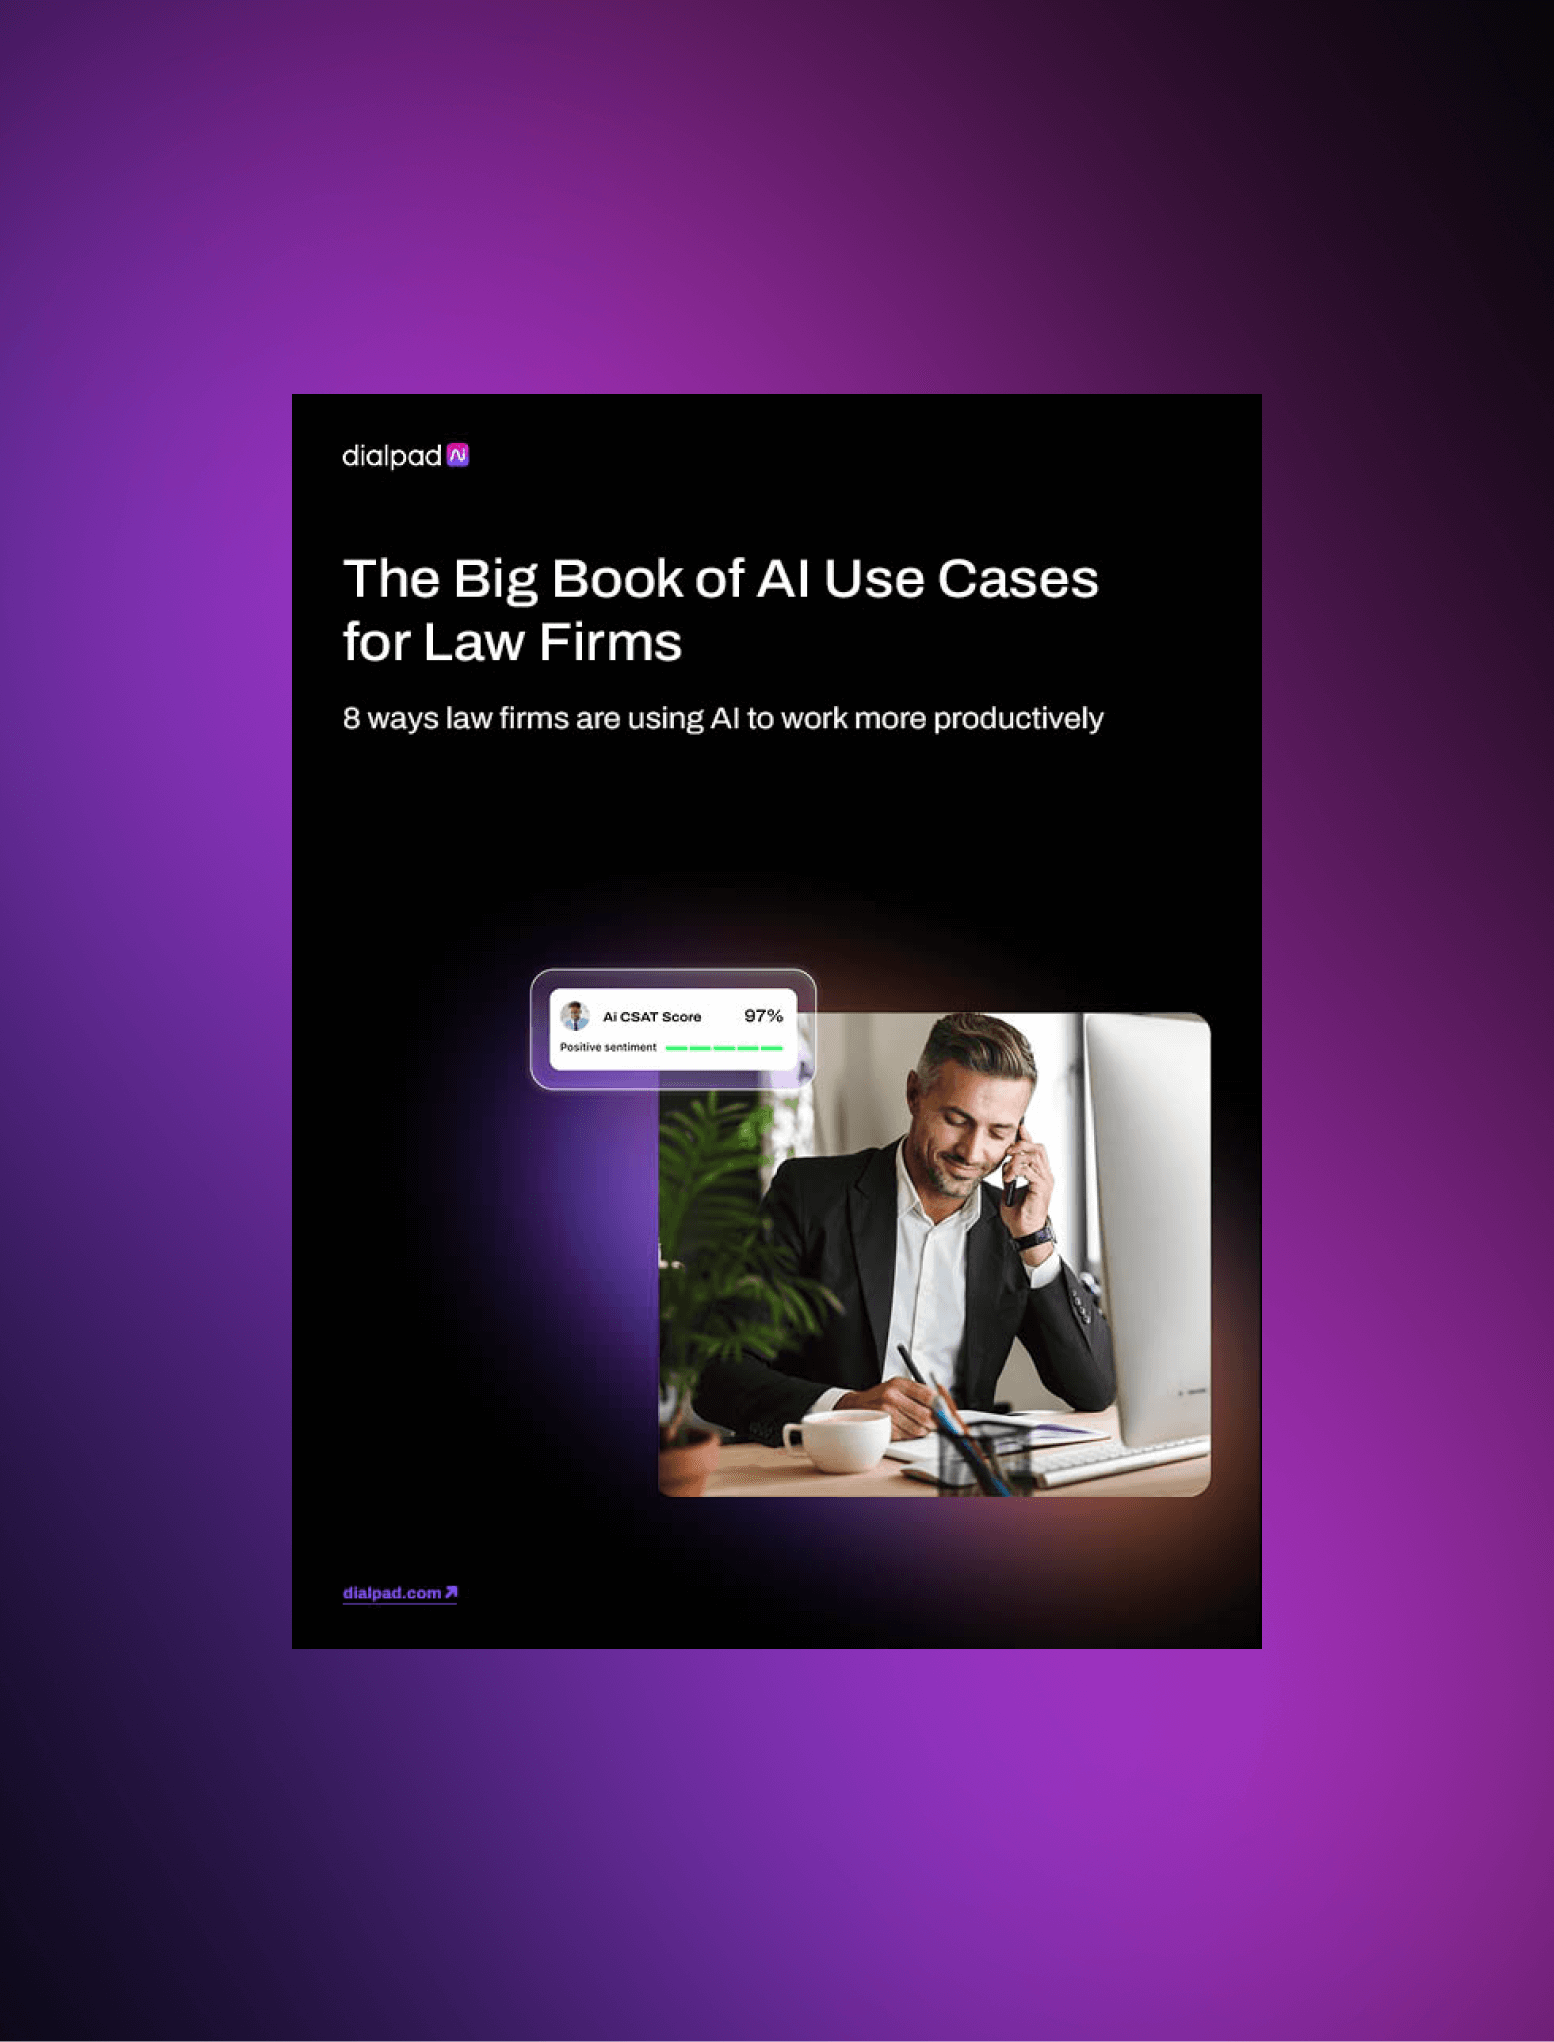 The Big Book of AI Use Cases for Law Firms hero image